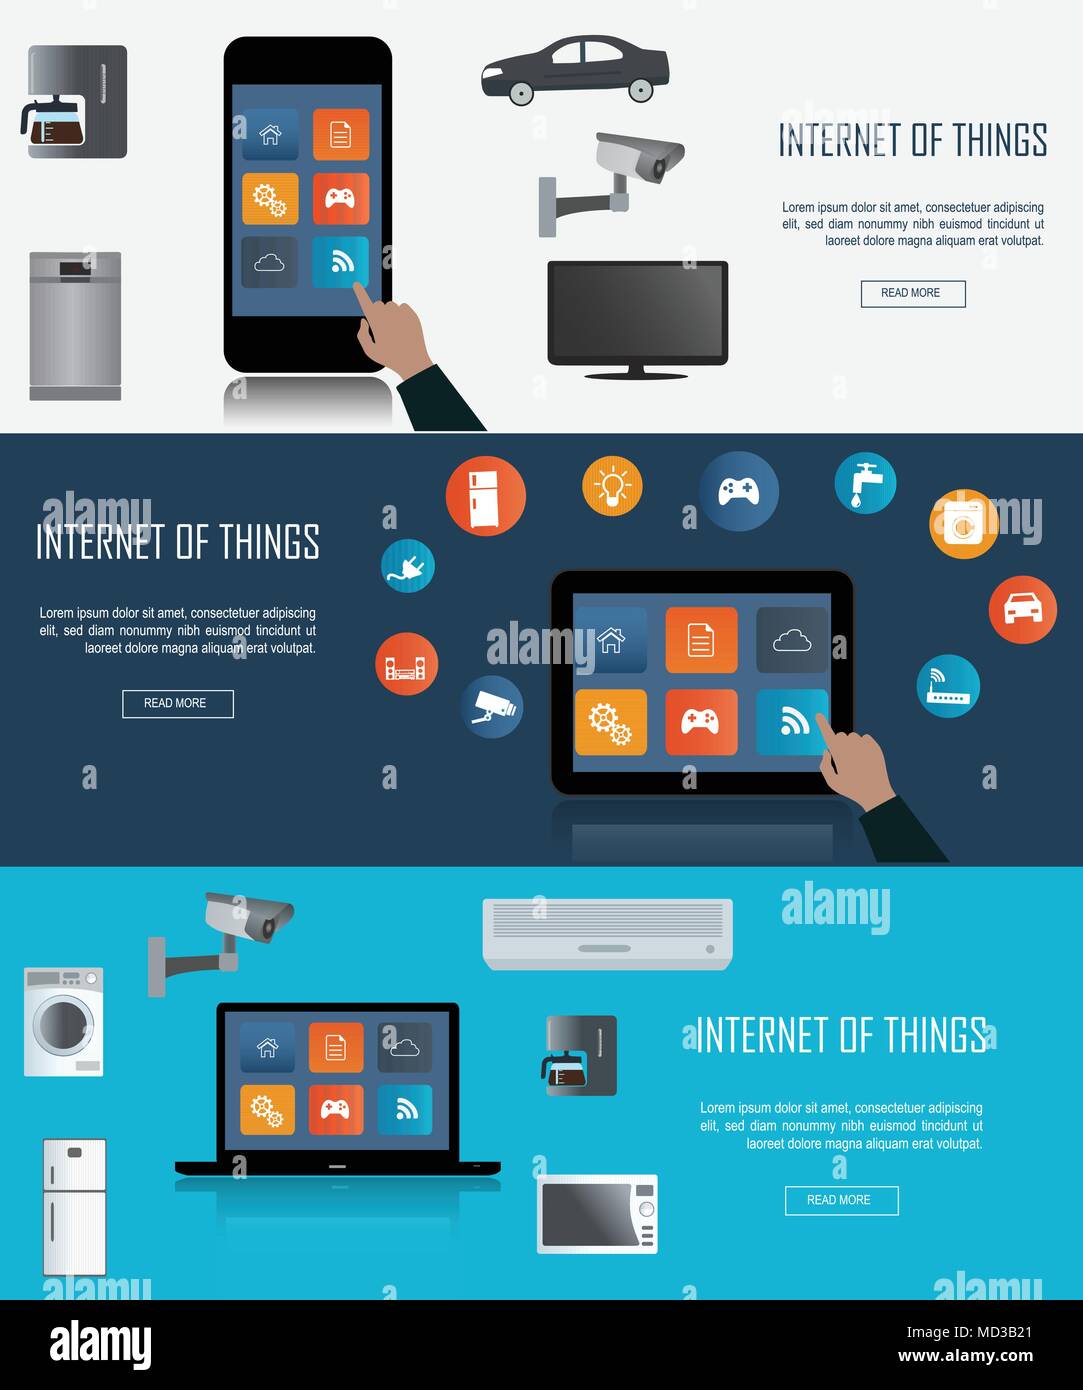 Tablet, Laptop, Smartphone with Internet of things (IoT) icons connecting together. Internet networking concept. Remote control concept  for smart hom Stock Vector